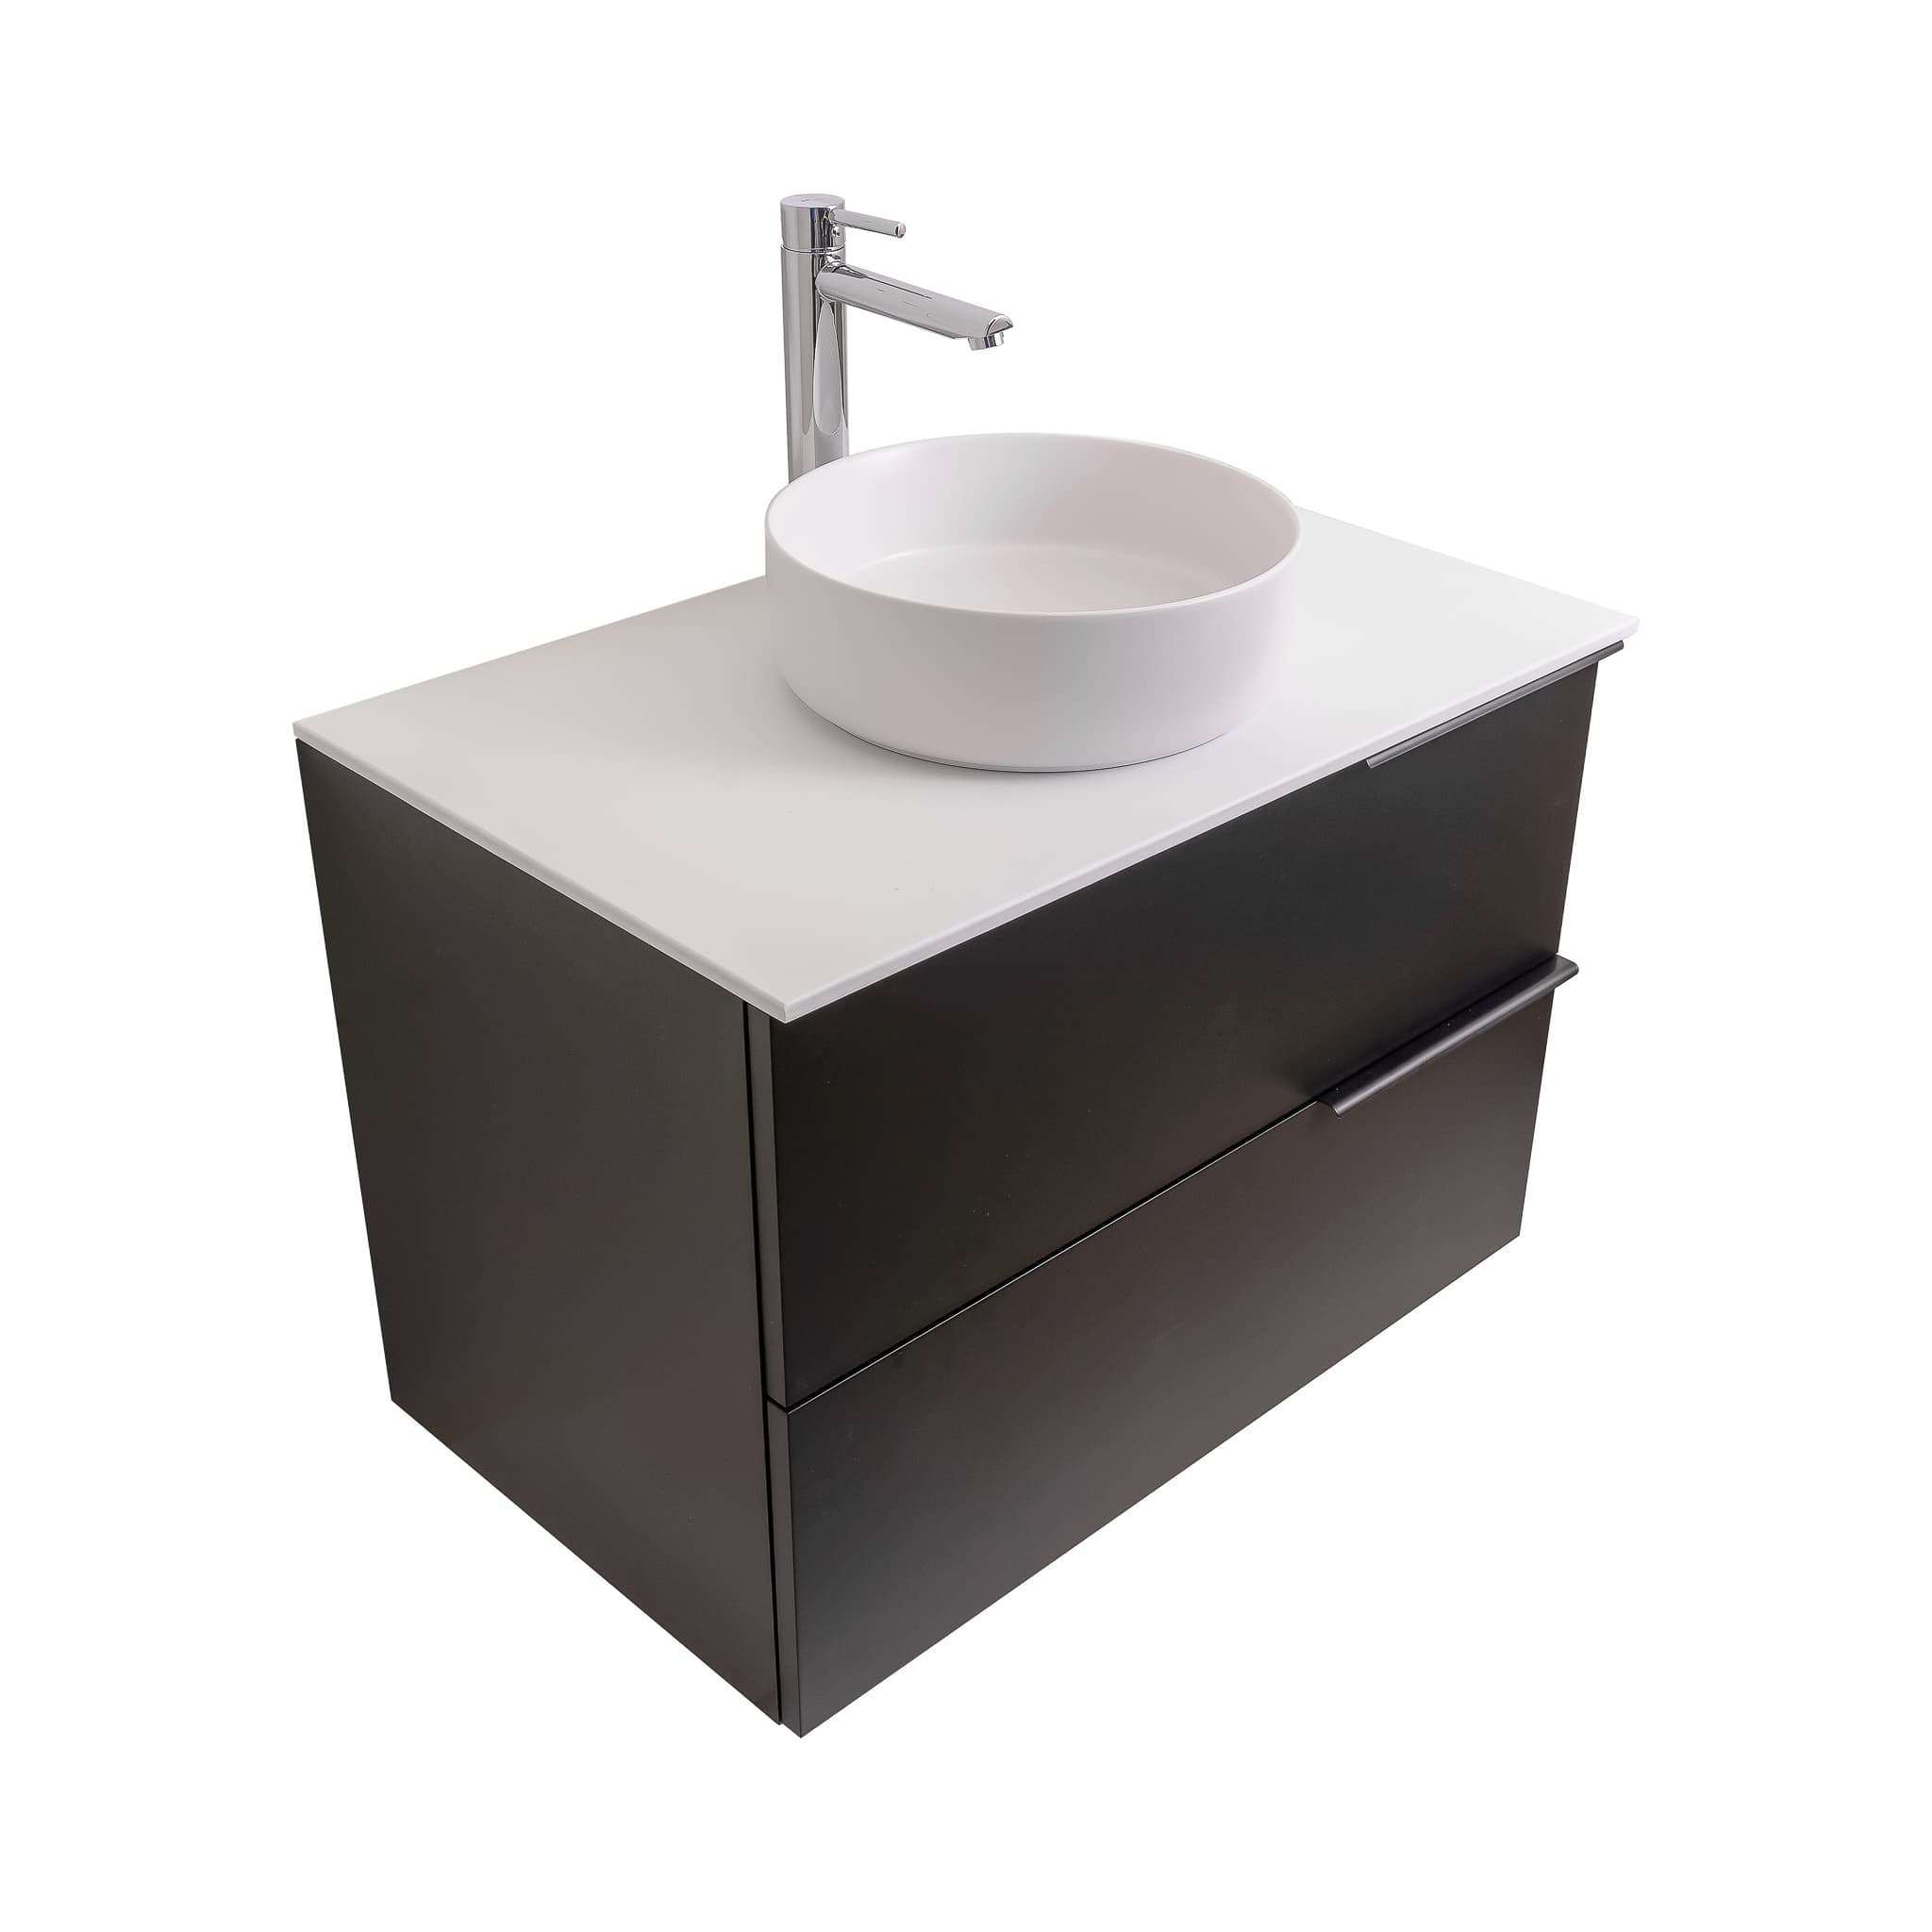 Mallorca 31.5 Matte Black Cabinet, Ares White Top And Ares White Ceramic Basin, Wall Mounted Modern Vanity Set